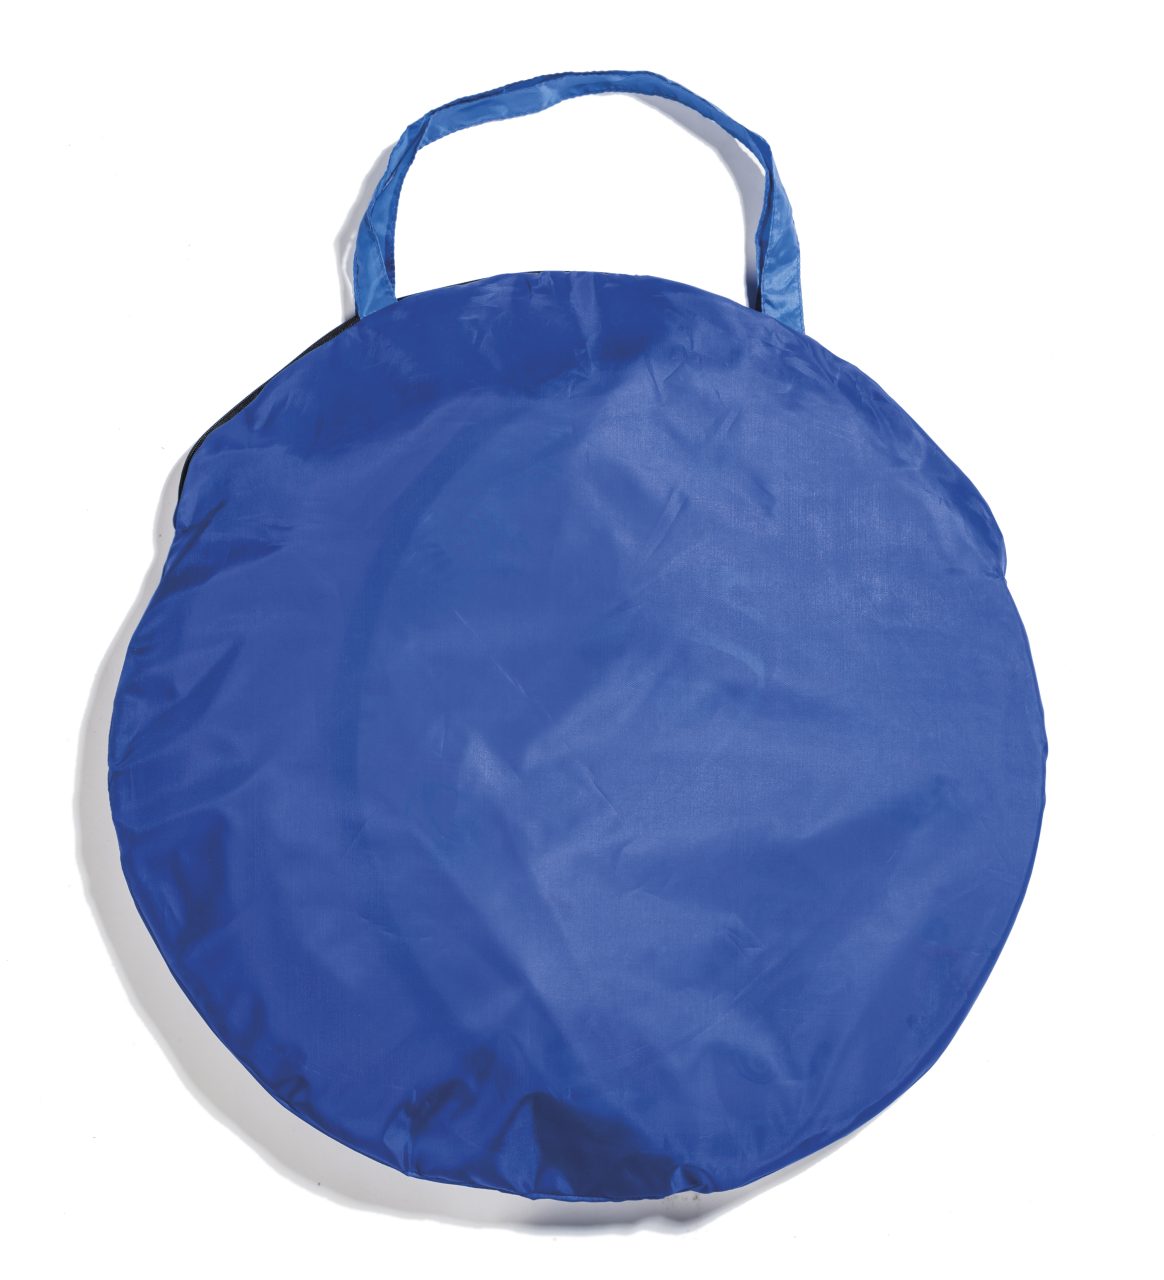 Blue Tent and 50 Balls. Product shown packed away within fold-up storage bag.